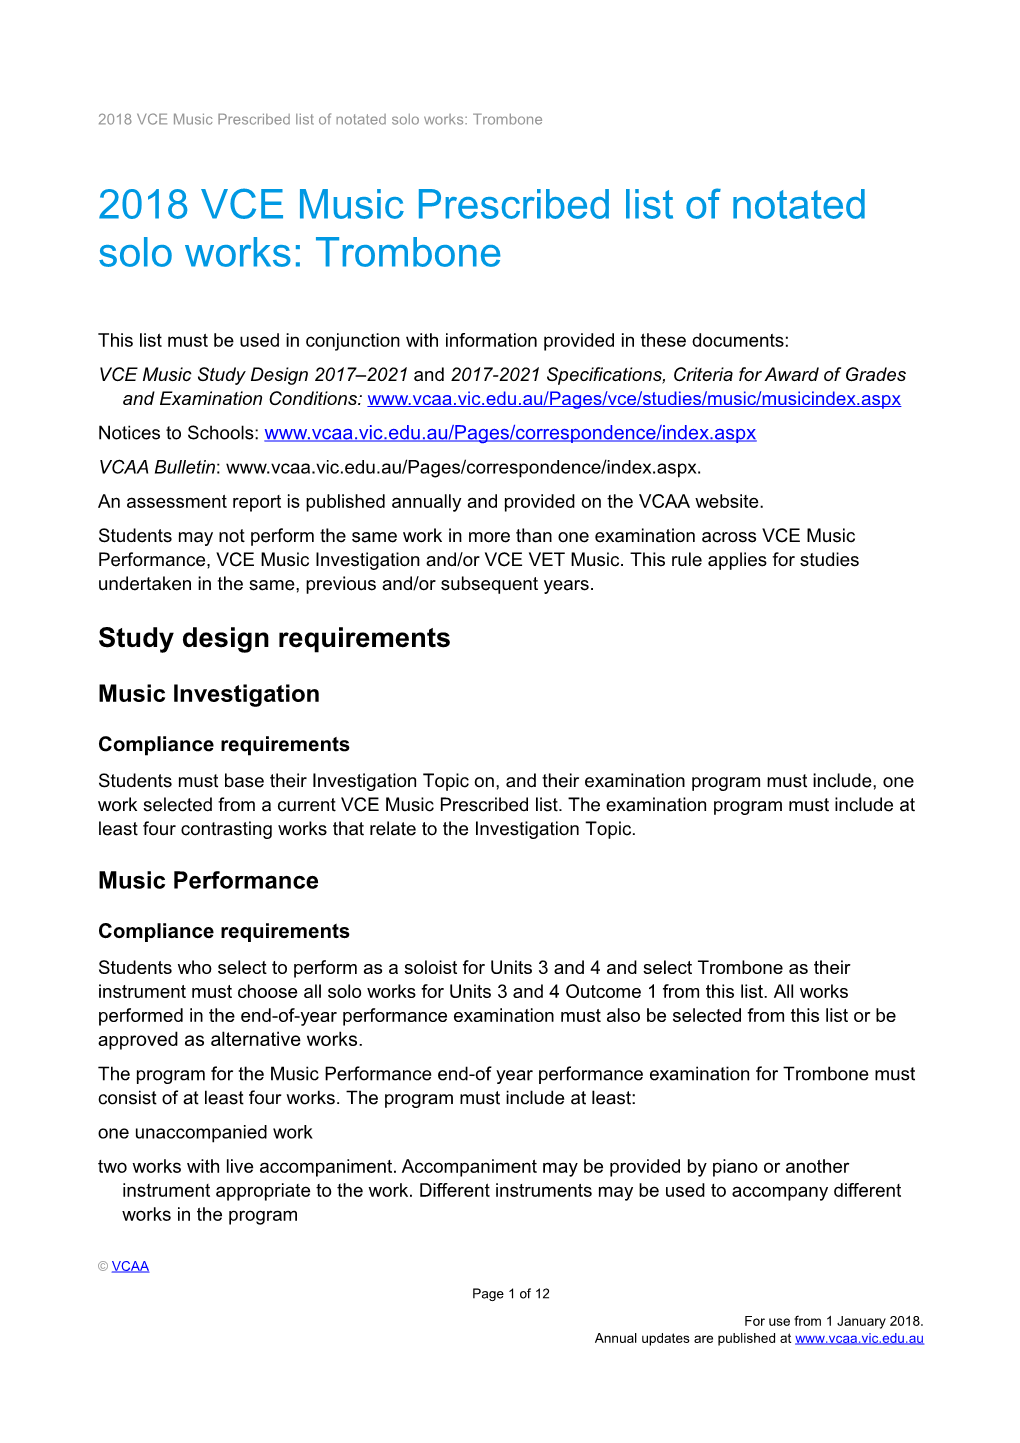 2018 VCE Music Prescribed List of Notated Solo Works: Trombone